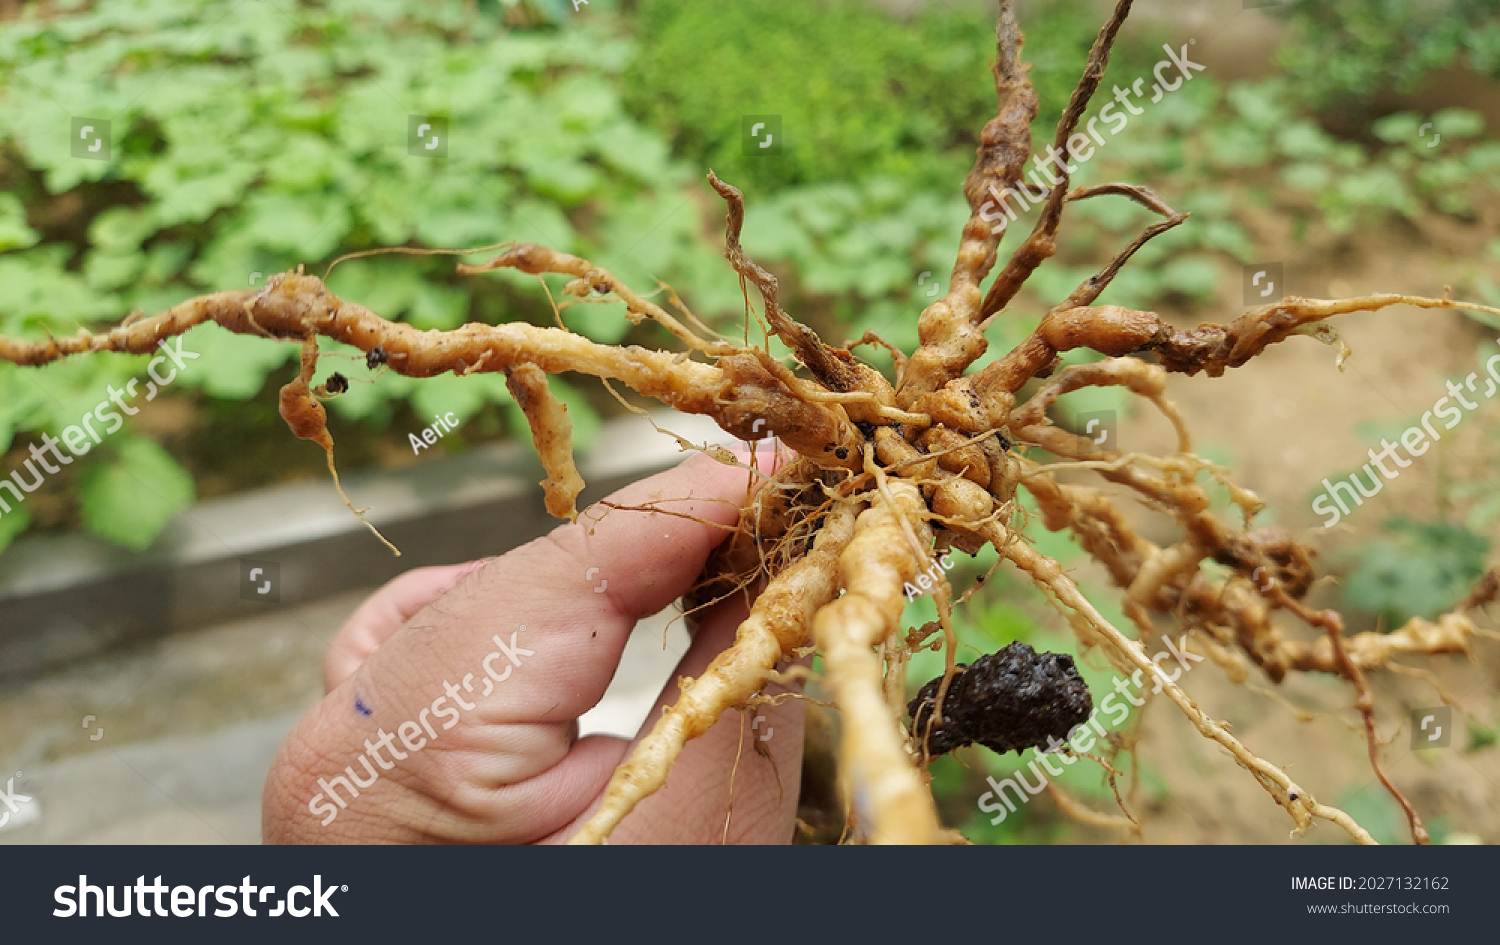 Brinjal Root affected by nematodes,  Galls formation in brinjal root #2027132162